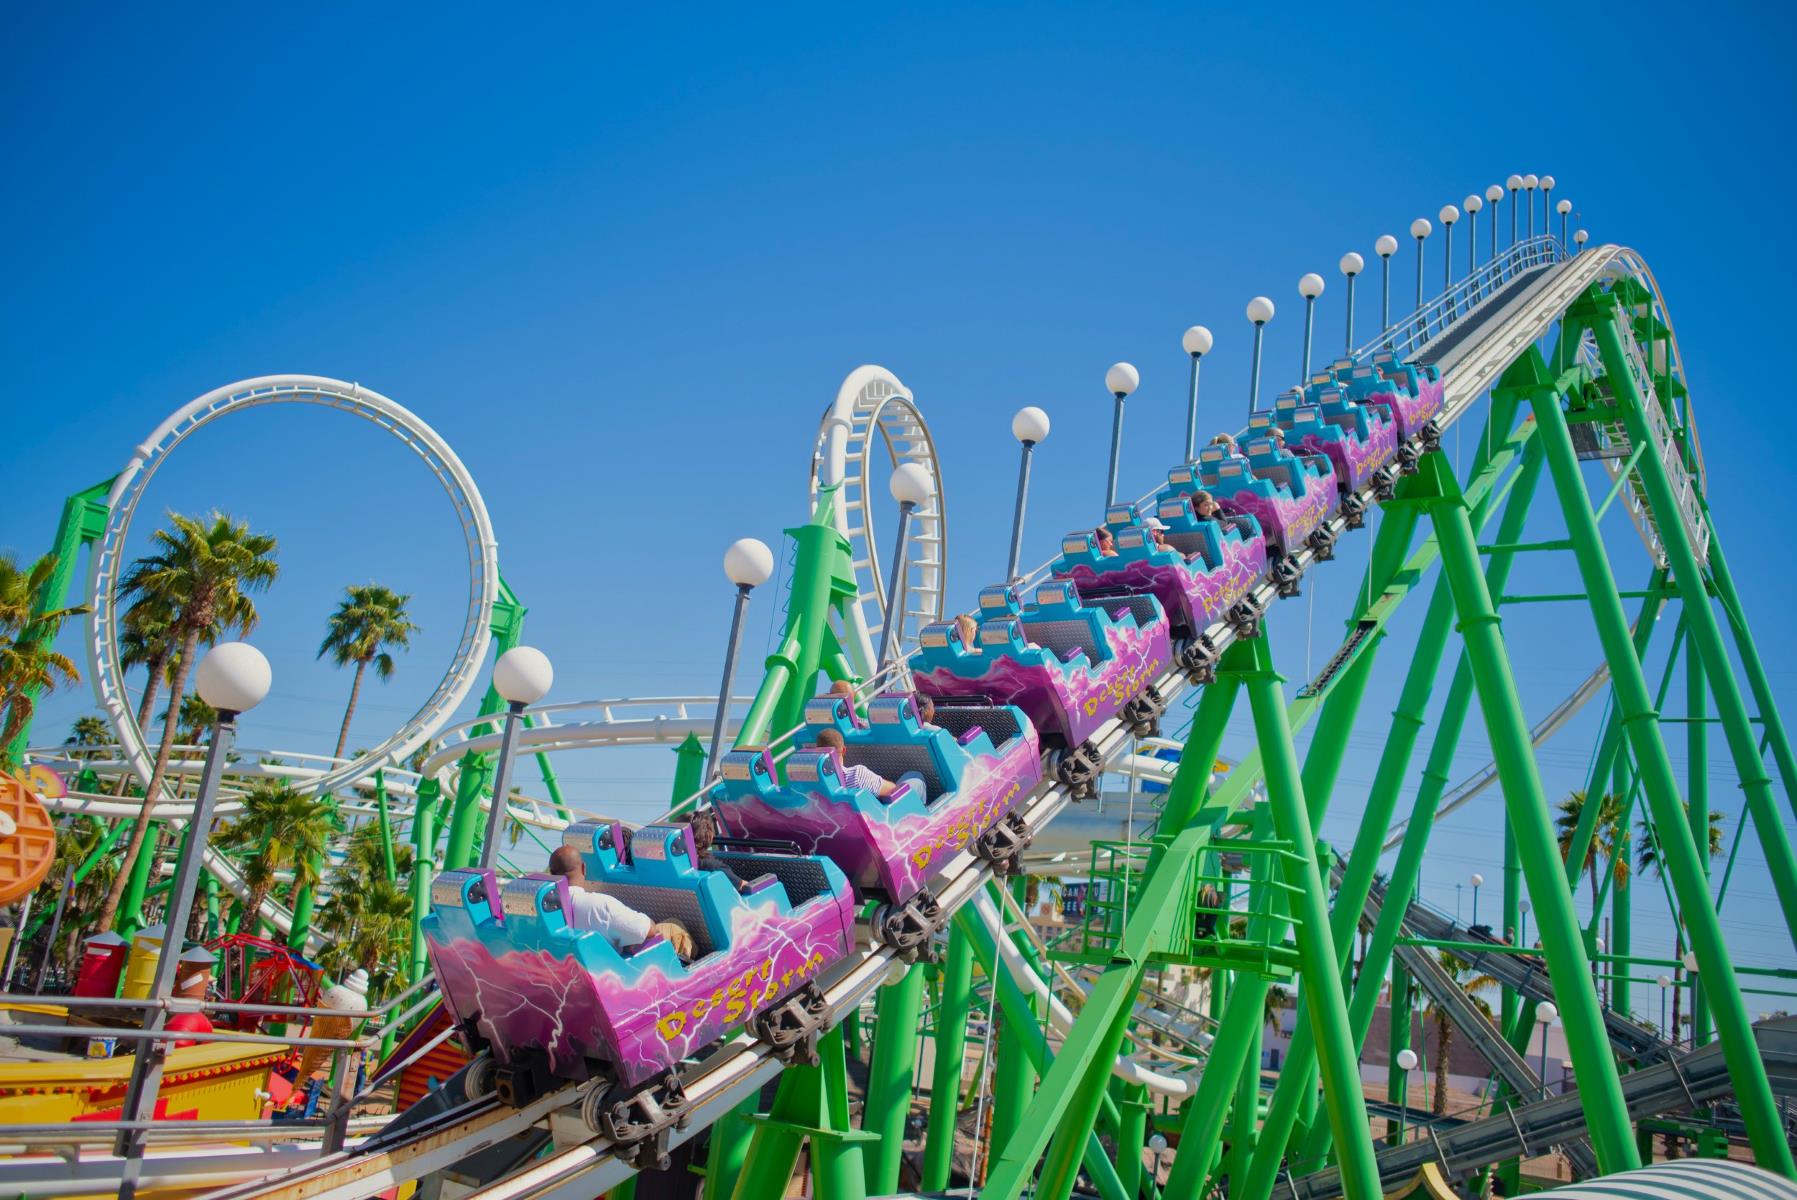 10 Roller Coasters Facts - Facts.net